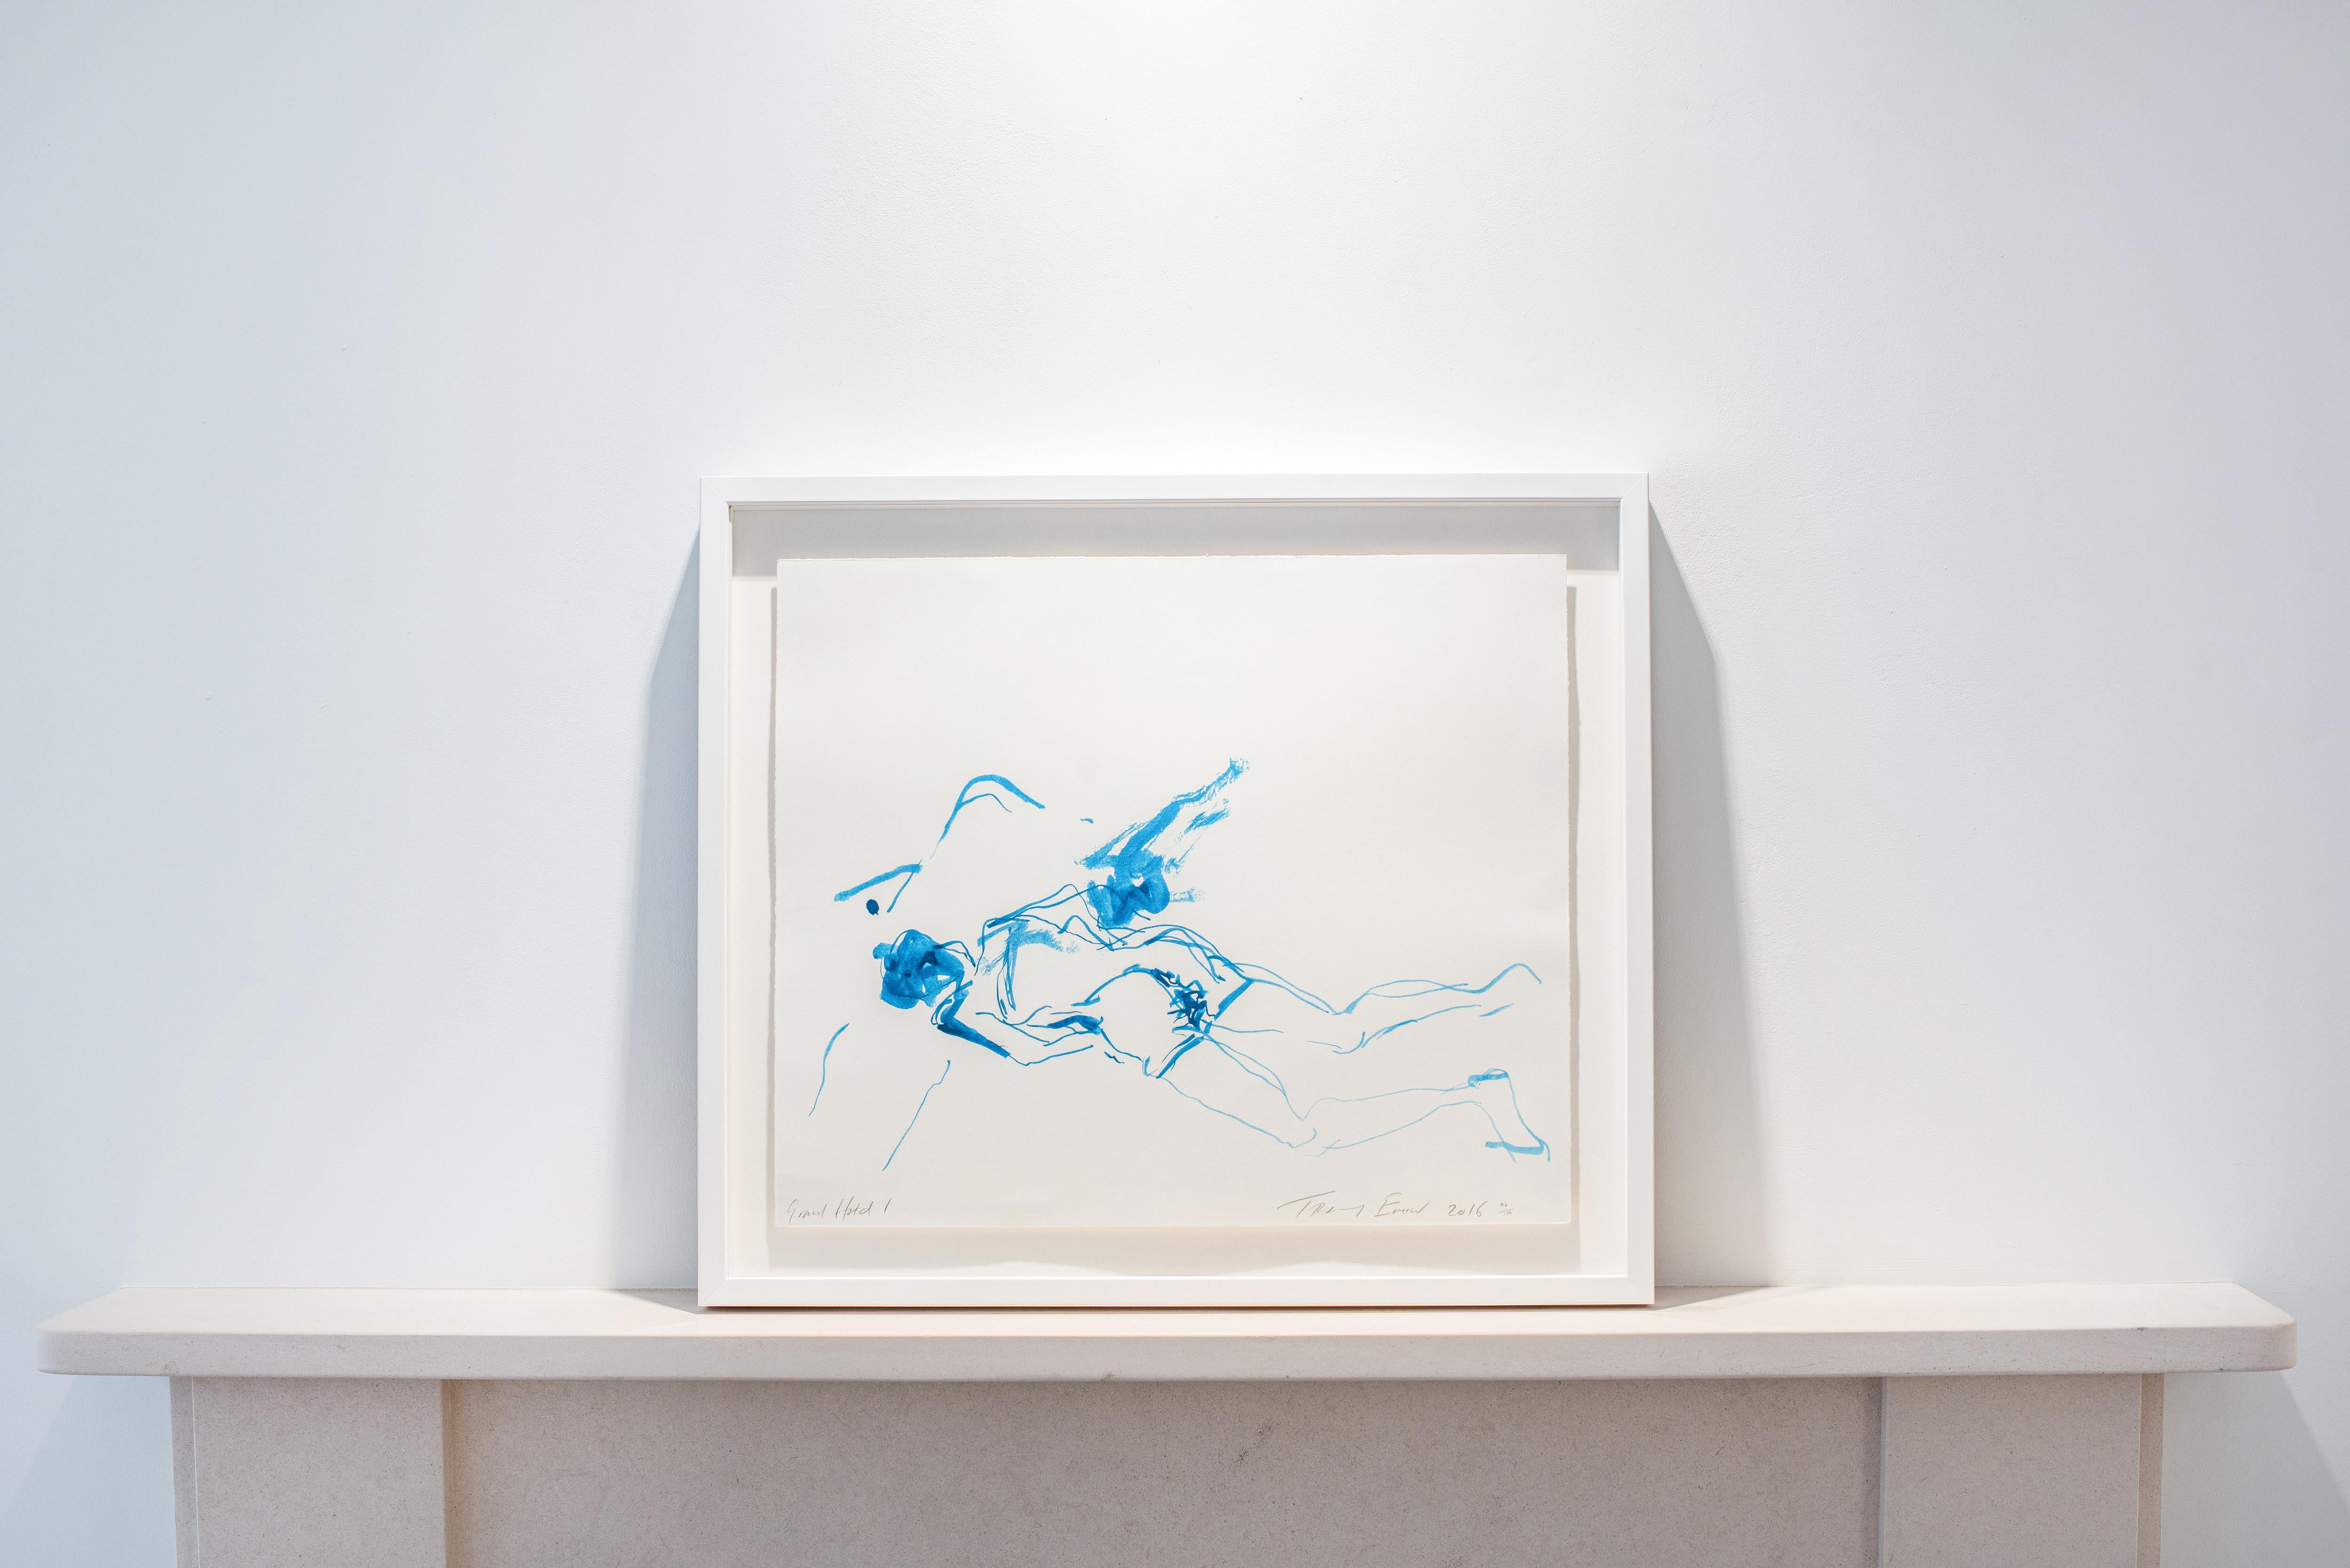 Tracey Emin, Grand Hotel I, Lithograph Print, 2016 For Sale 2